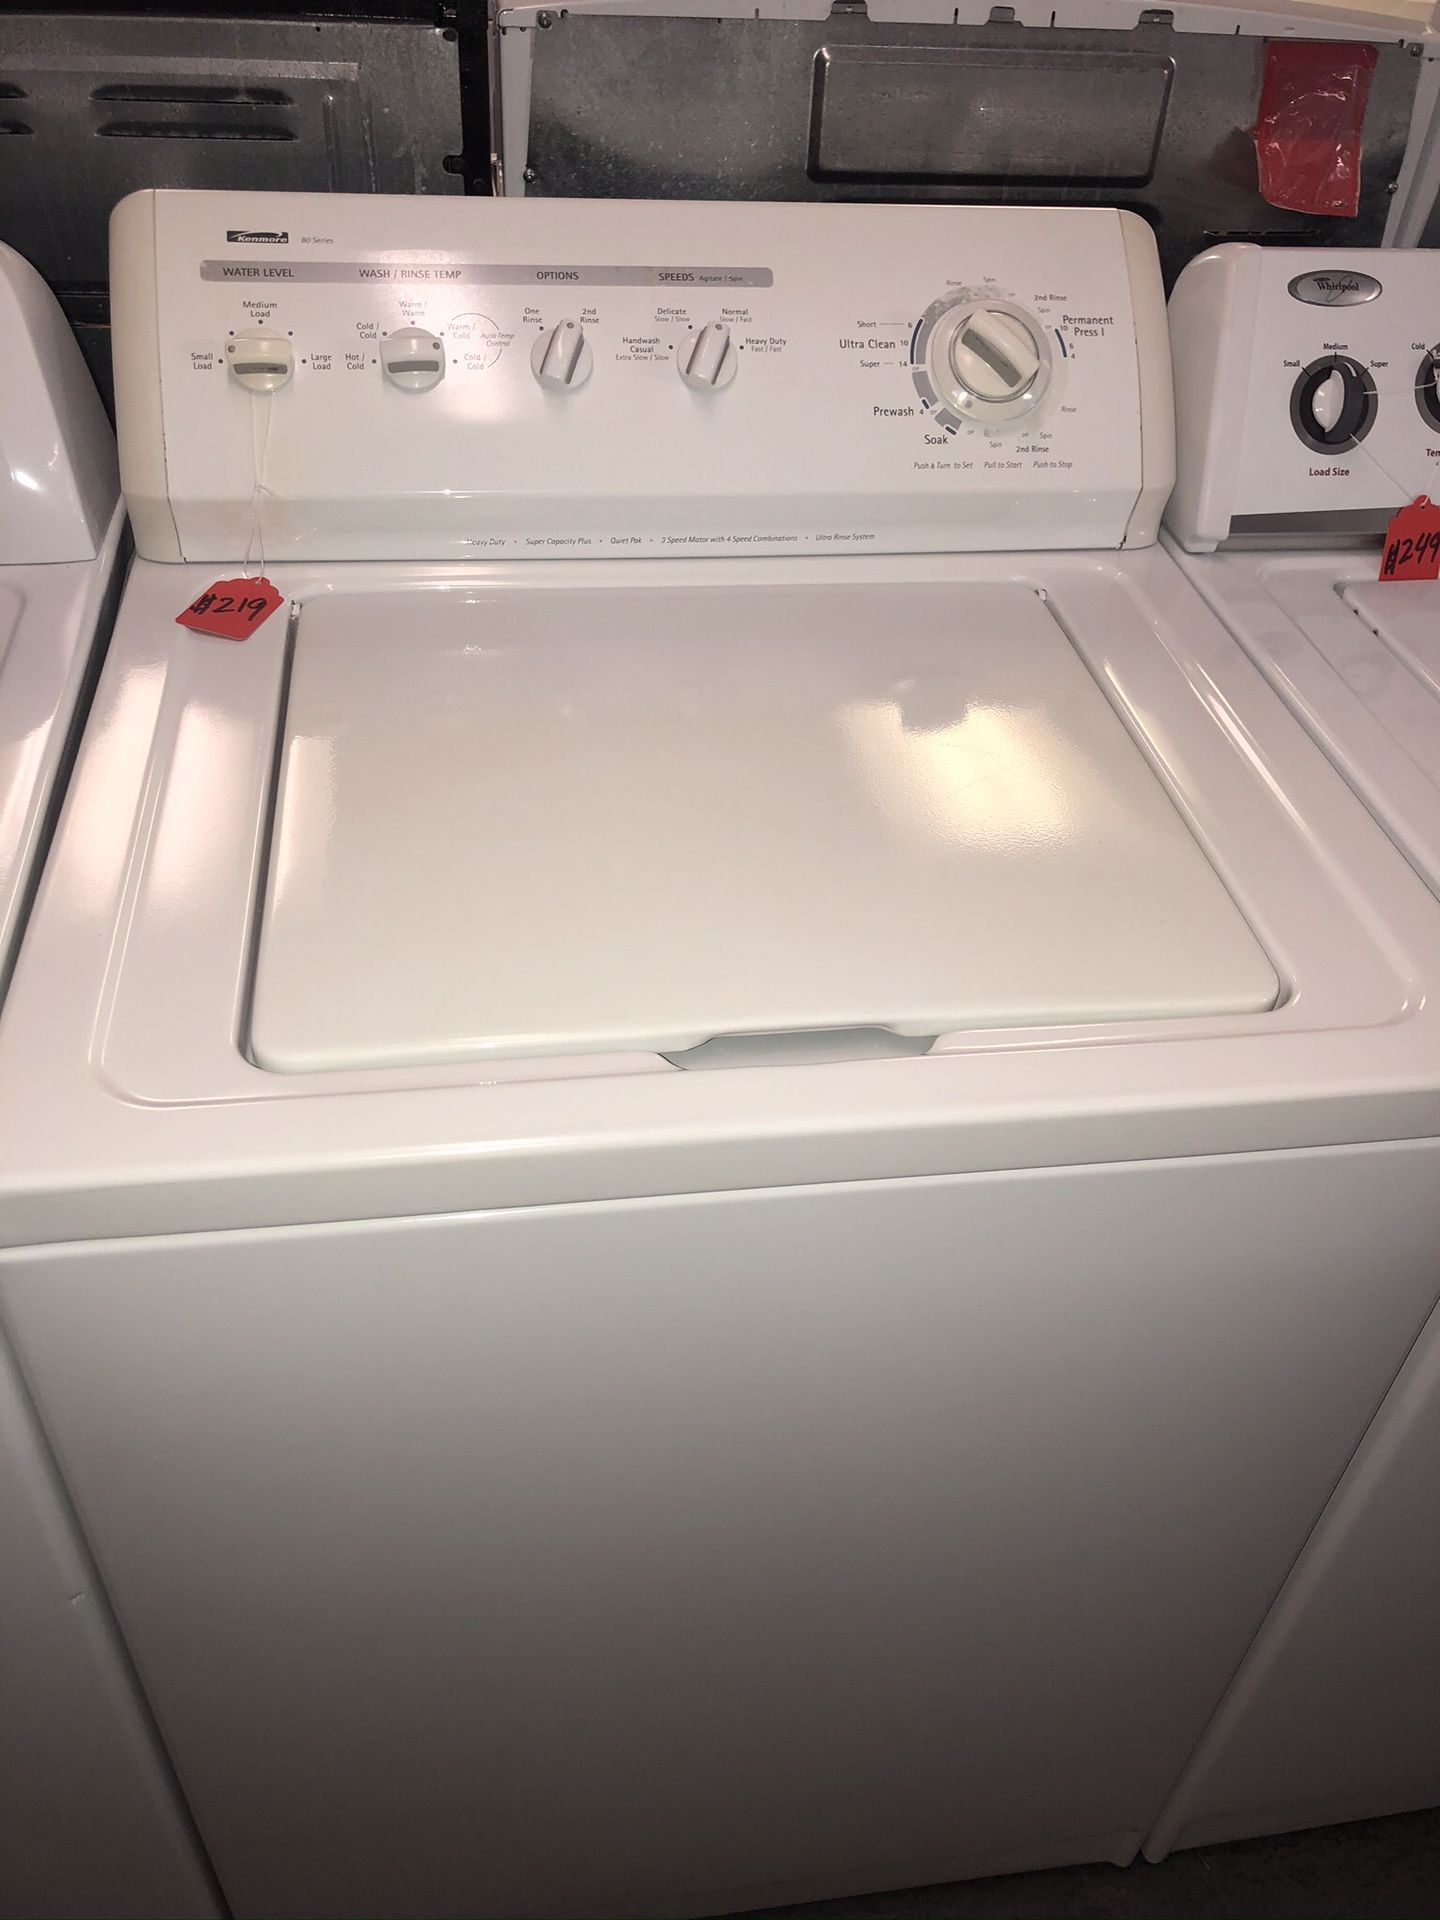 Used kenmore washer. 1 year warranty